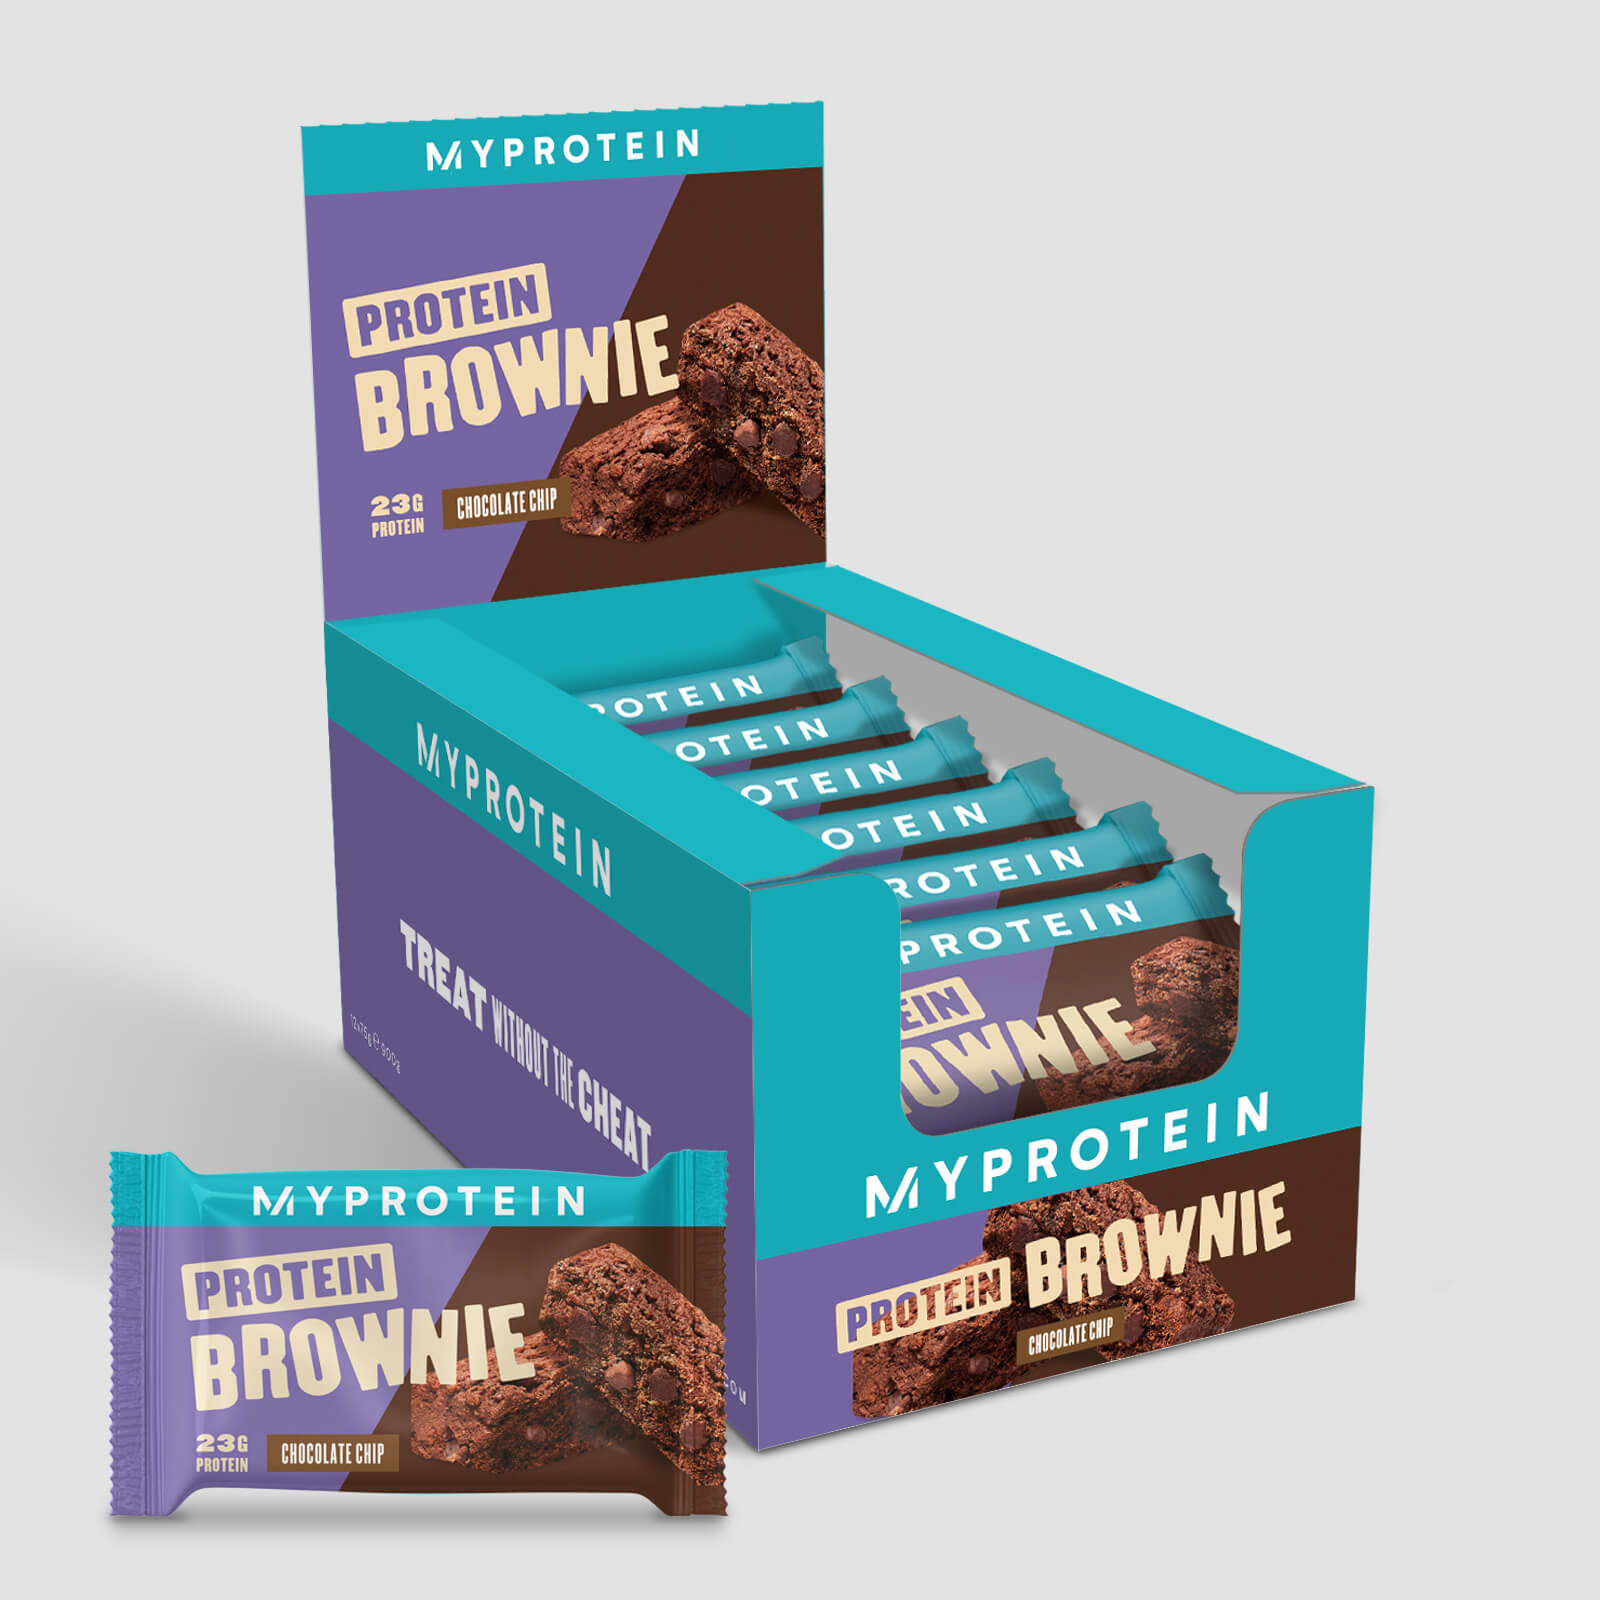 Protein Brownie - Chocolate